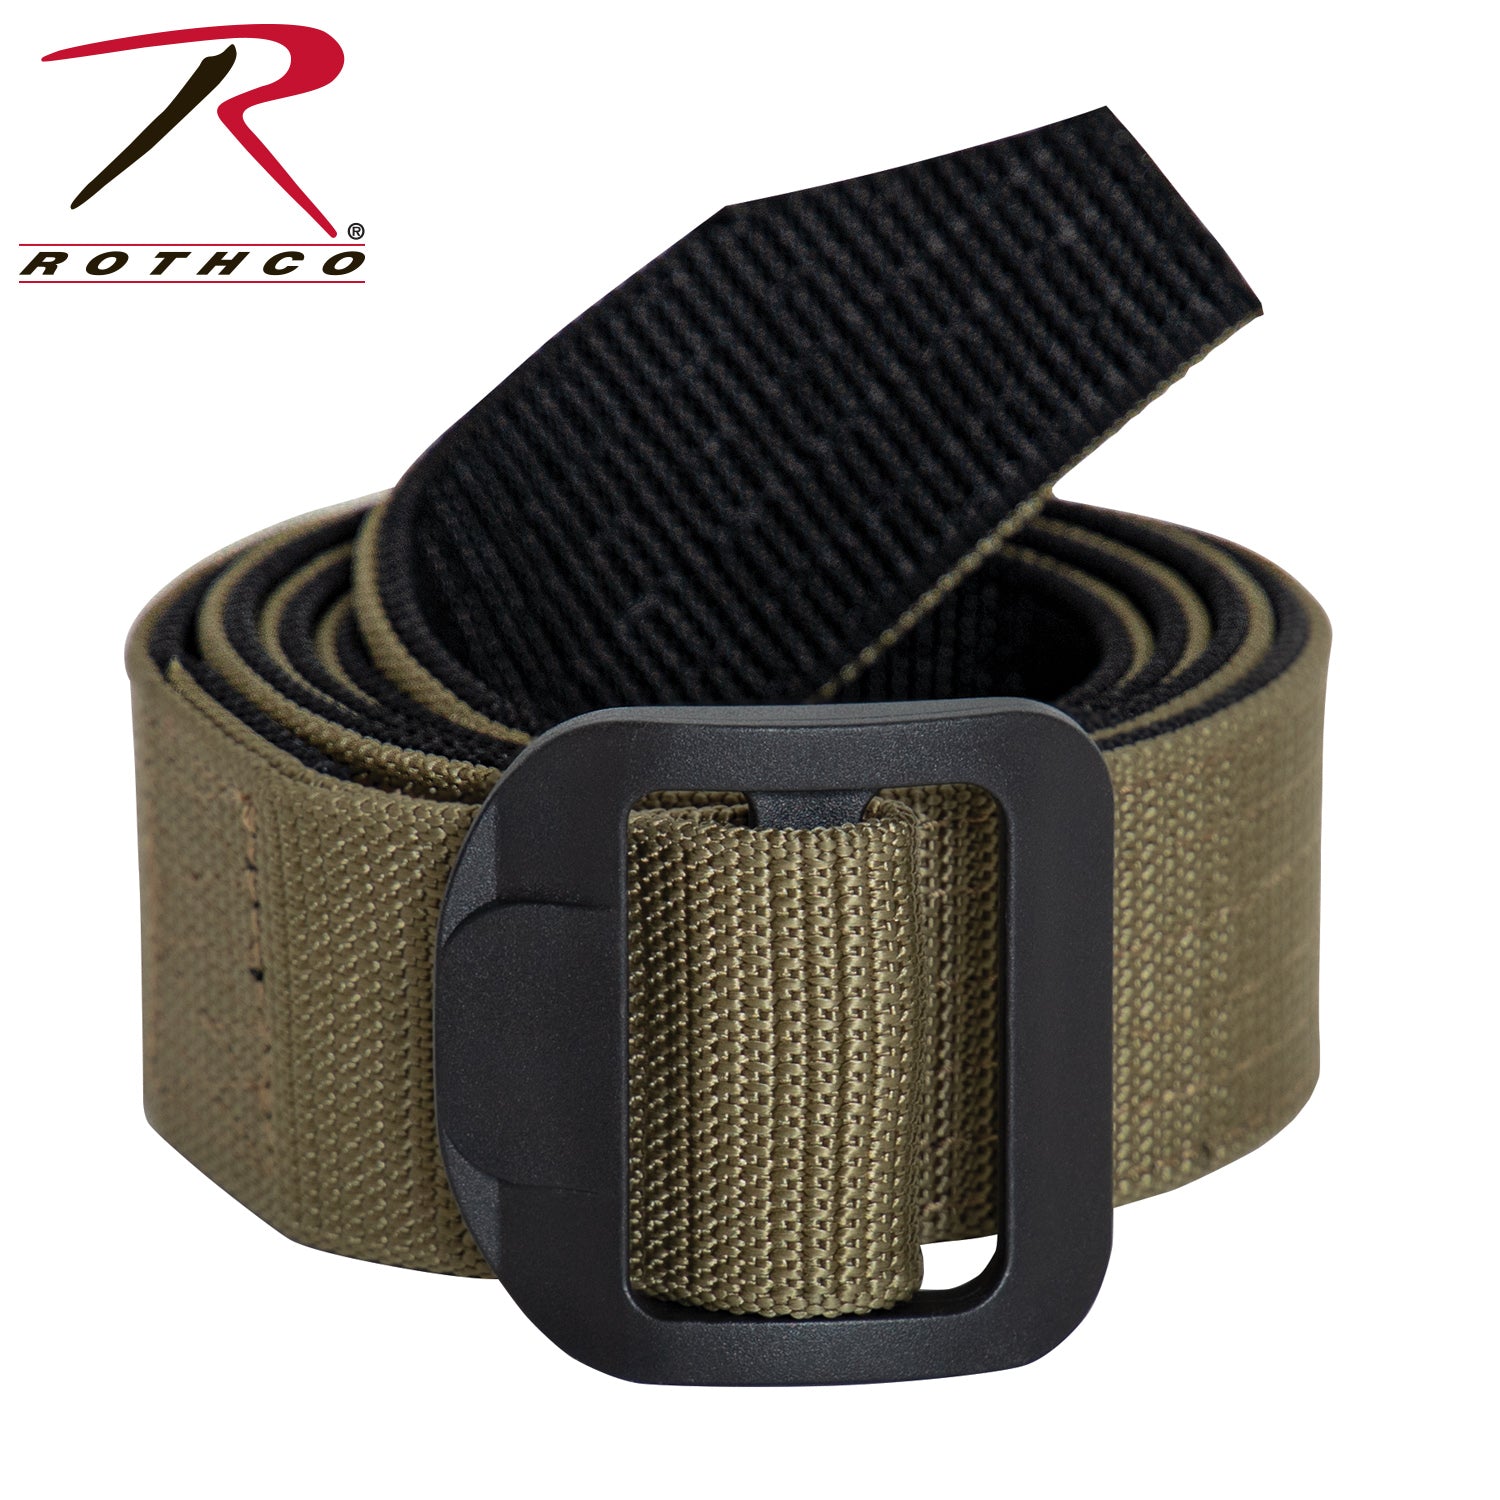 Rothco Reversible Airport Friendly Riggers Belt - Black / Coyote